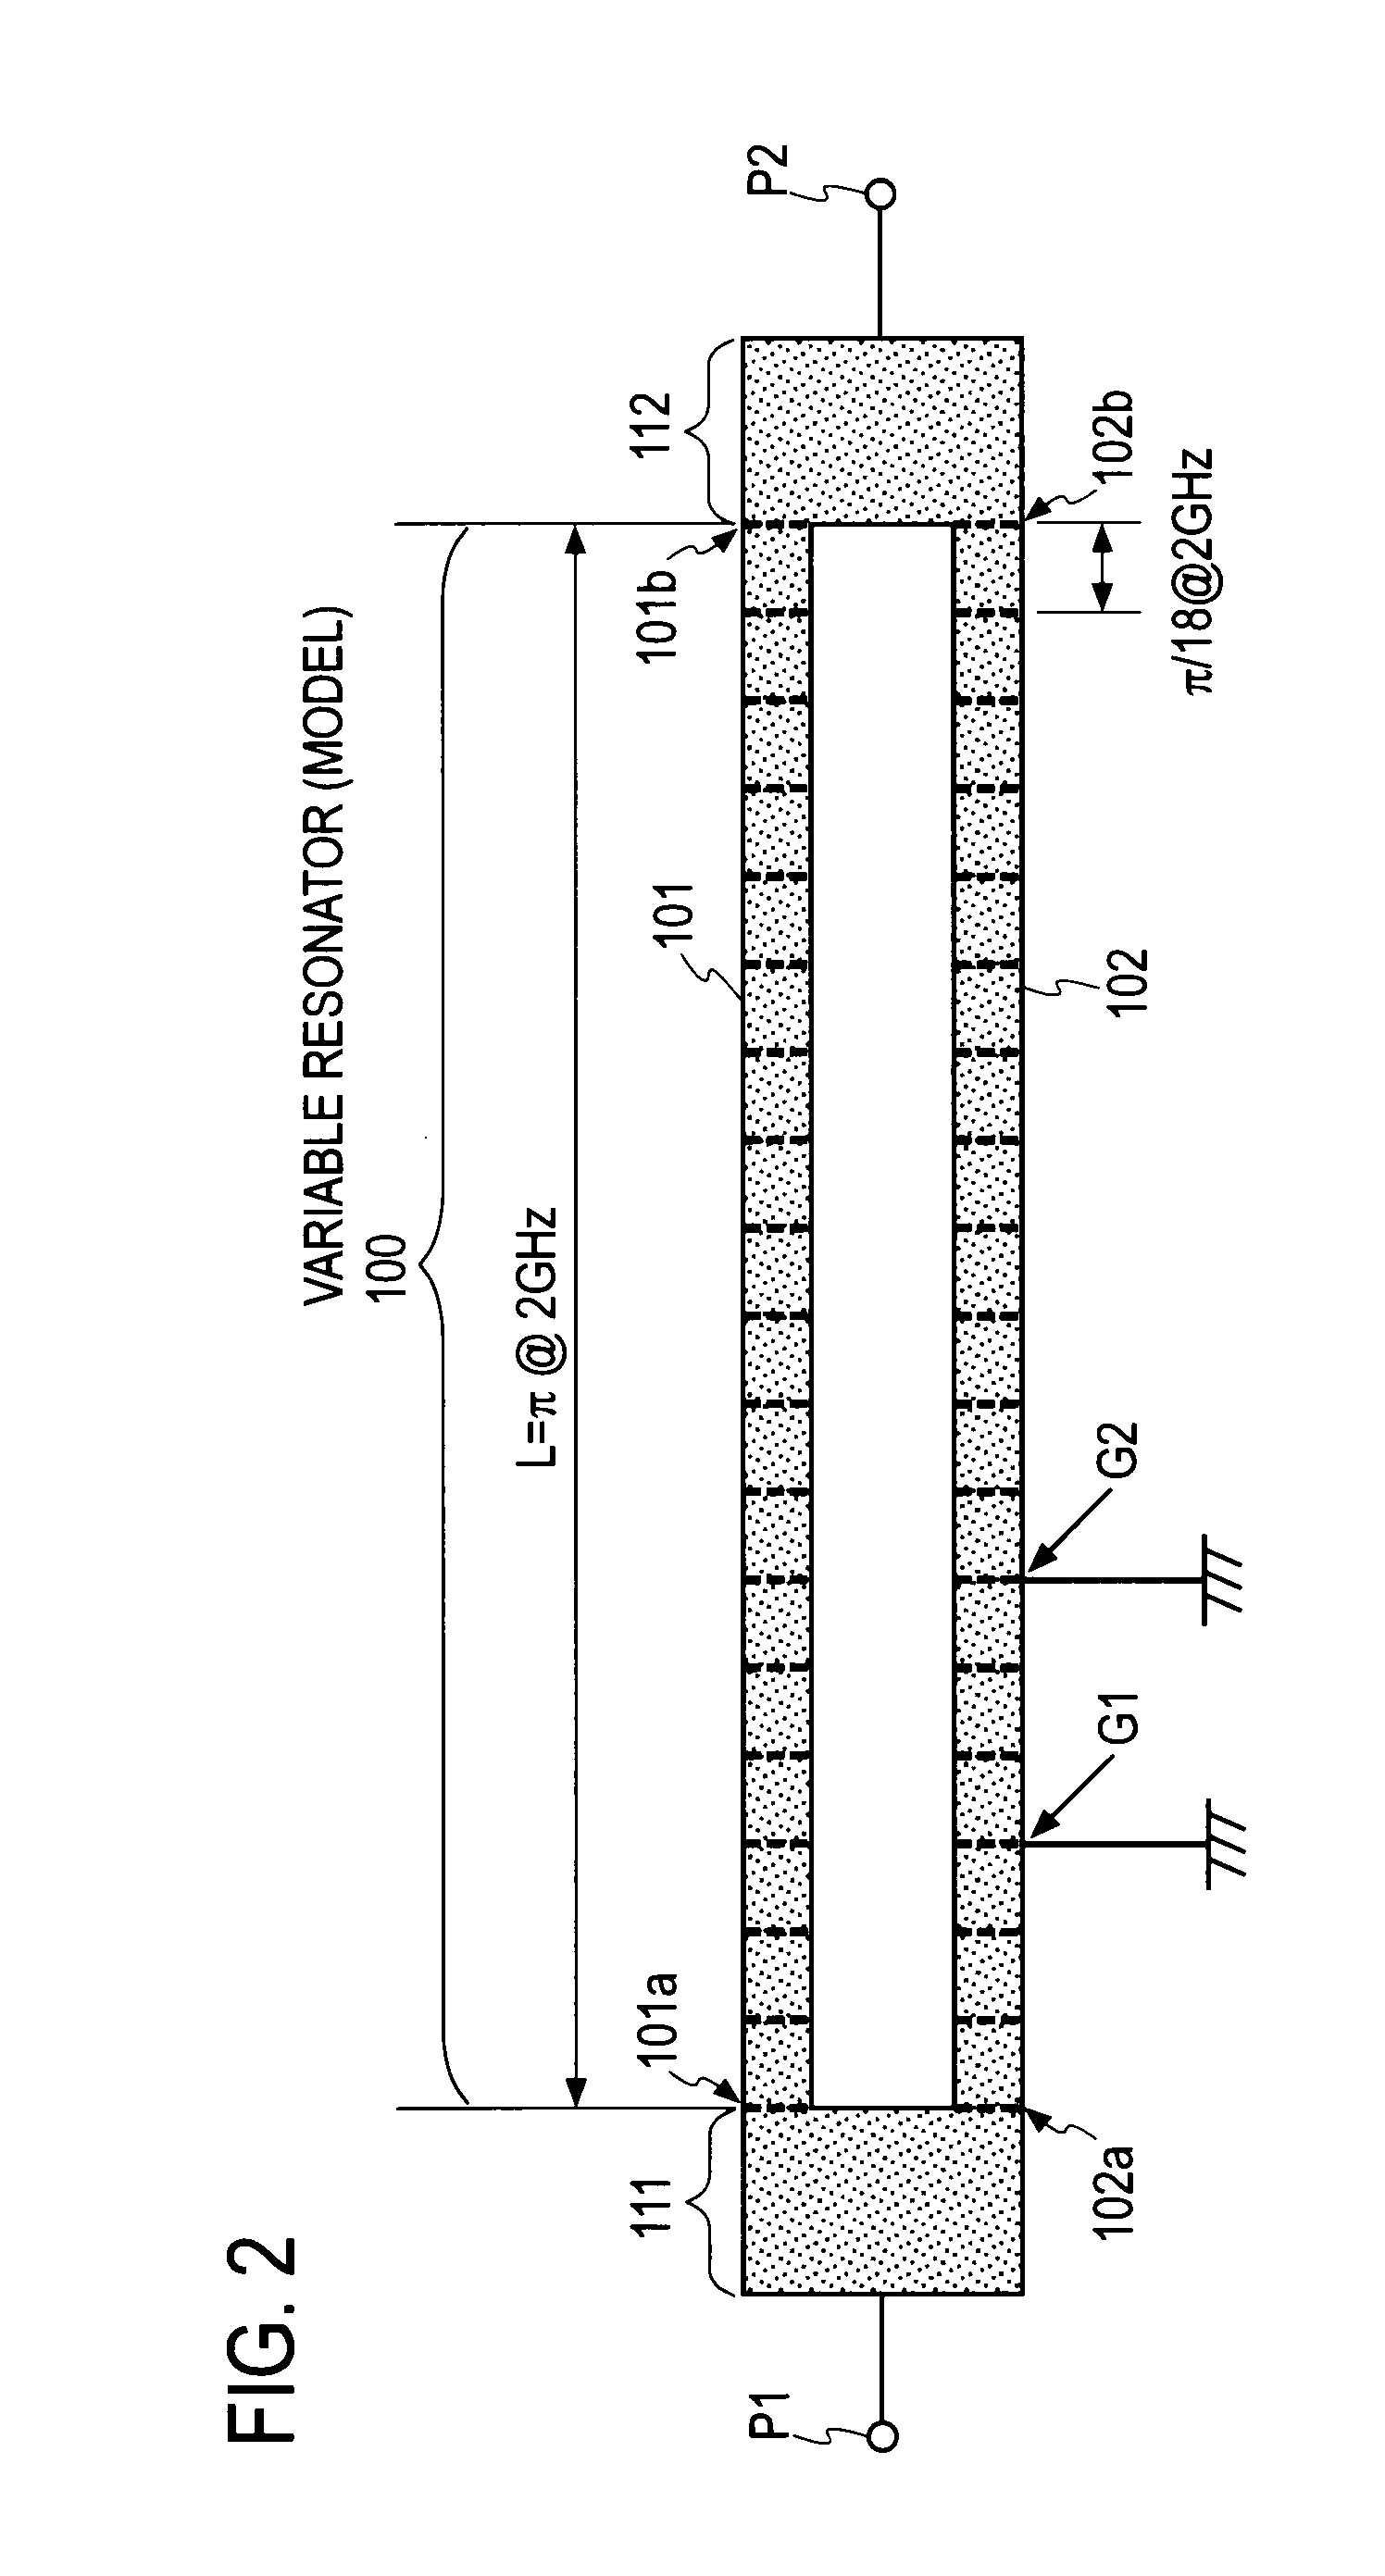 Multirole circuit element capable of operating as variable resonator or transmission line and variable filter incorporating the same